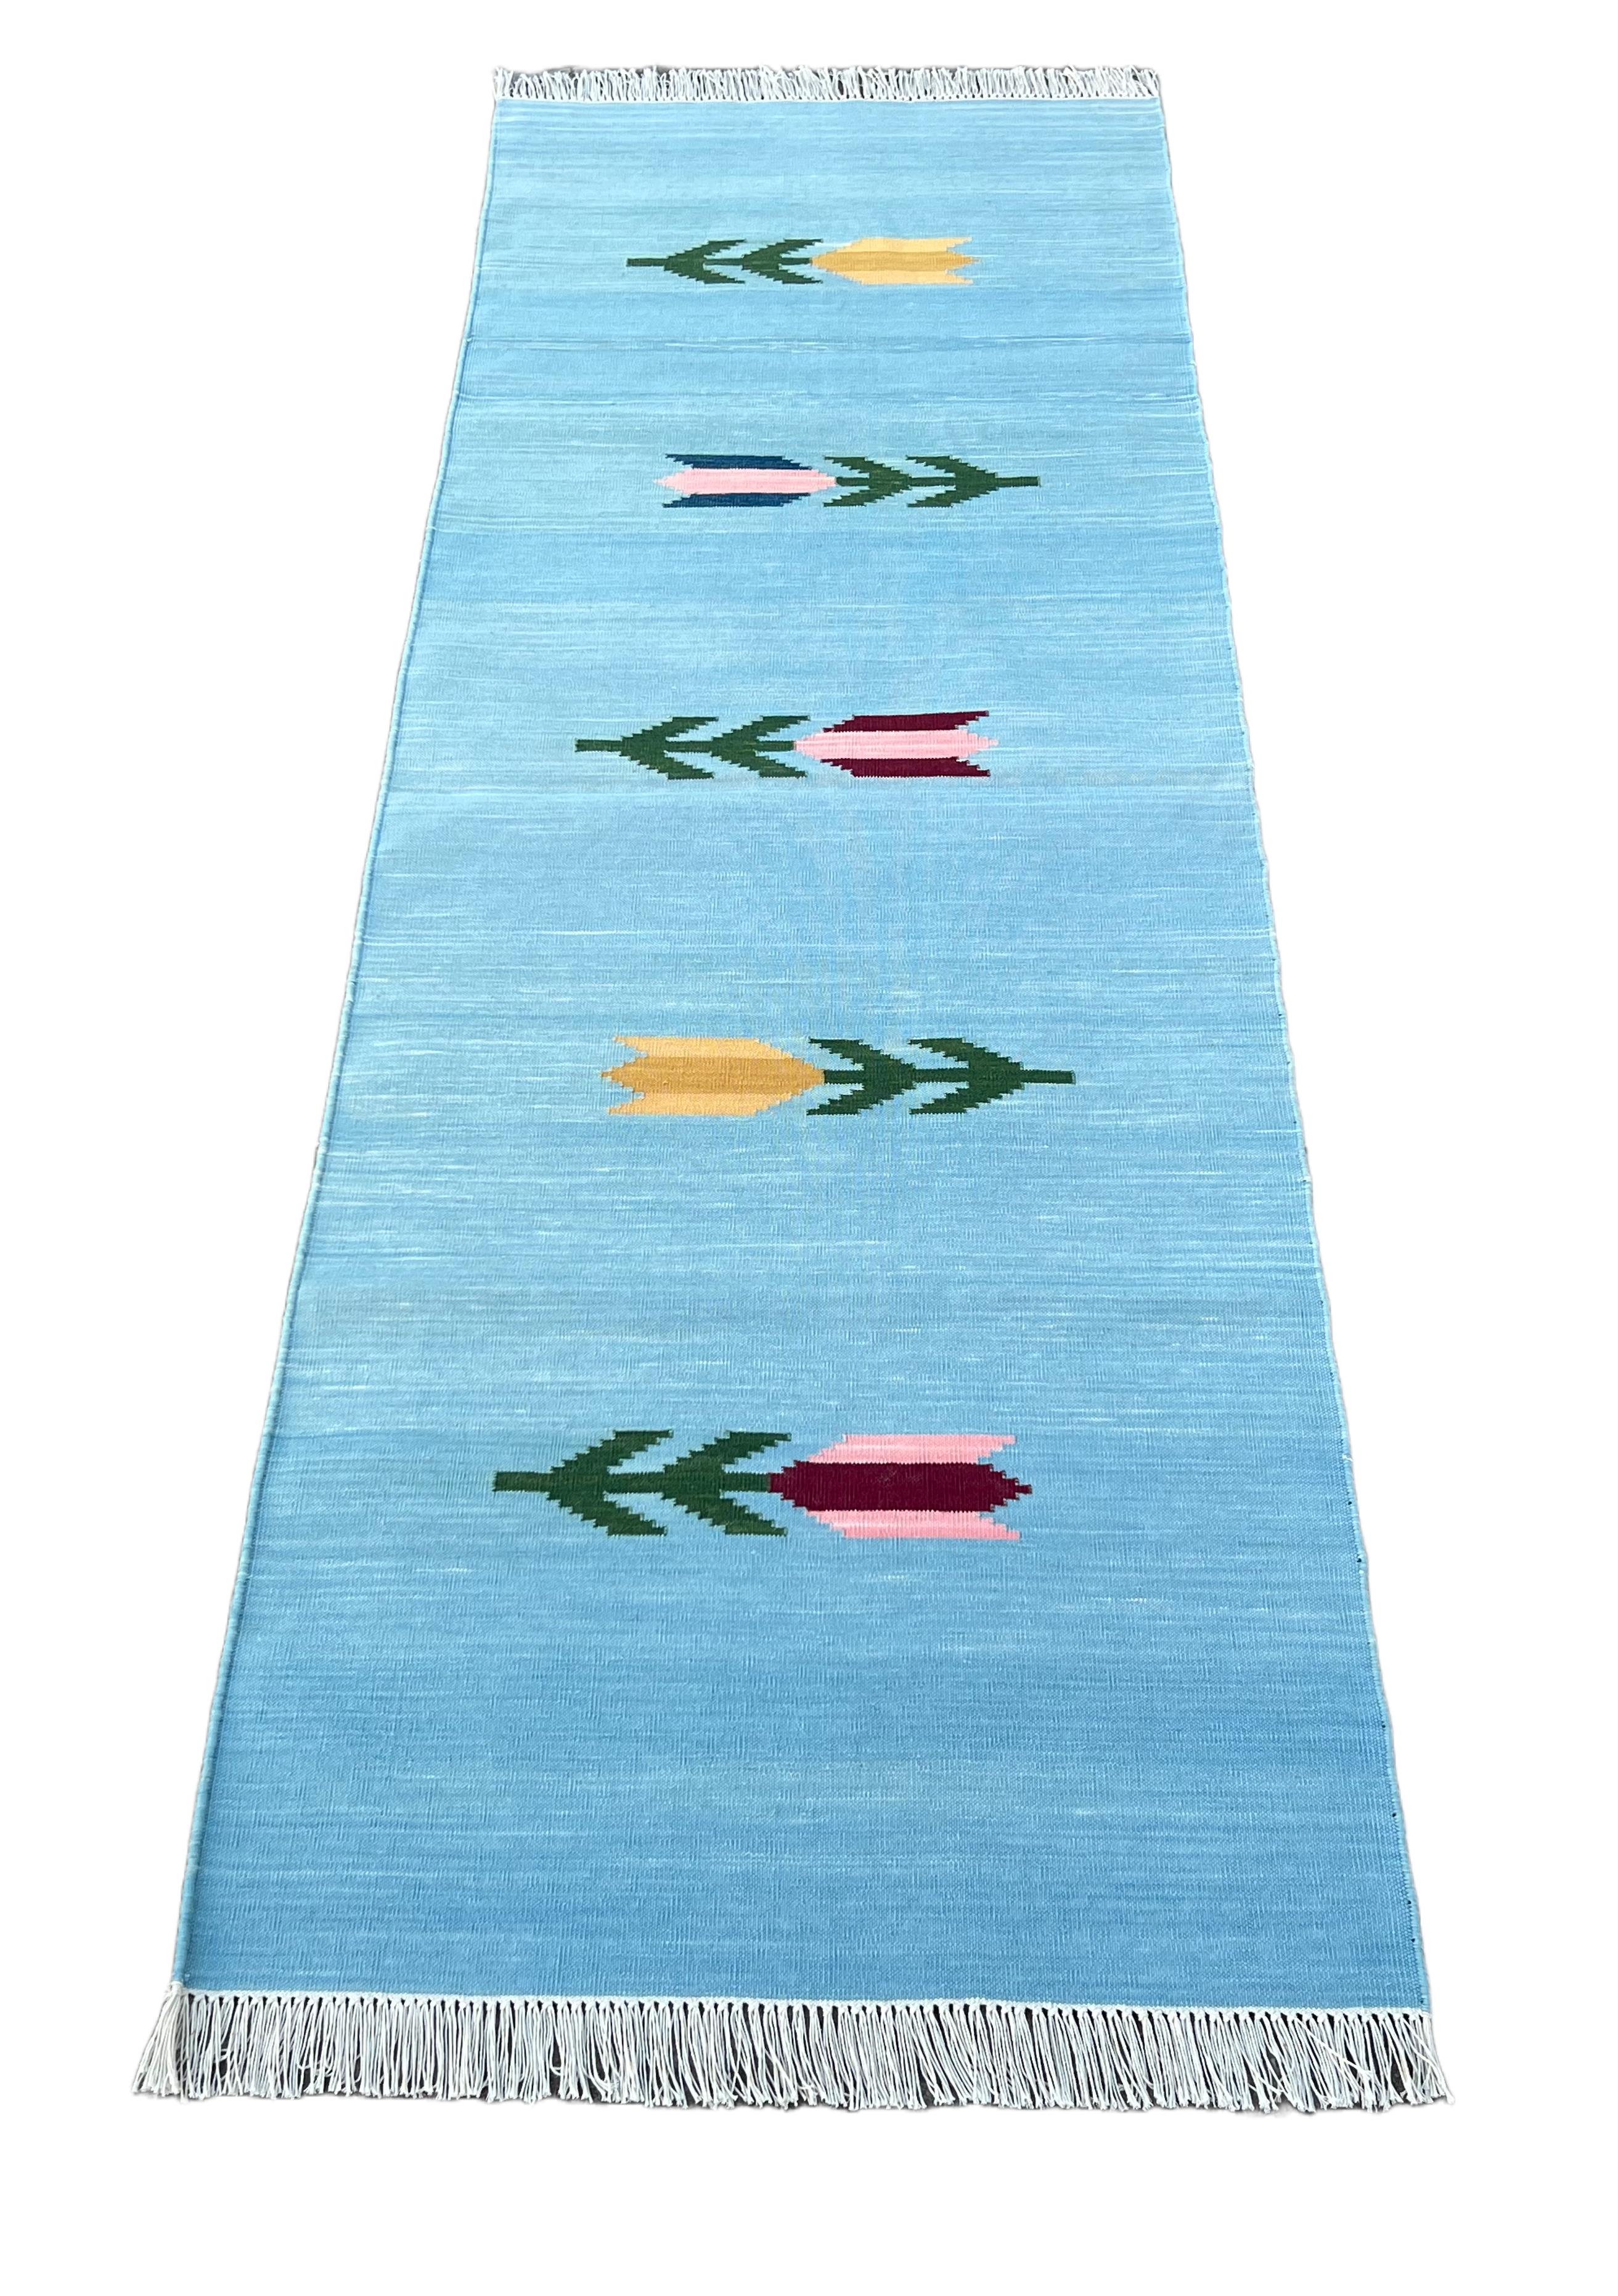 Contemporary Handmade Cotton Area Flat Weave Runner, 2x10 Blue And Green Leaf Indian Dhurrie For Sale